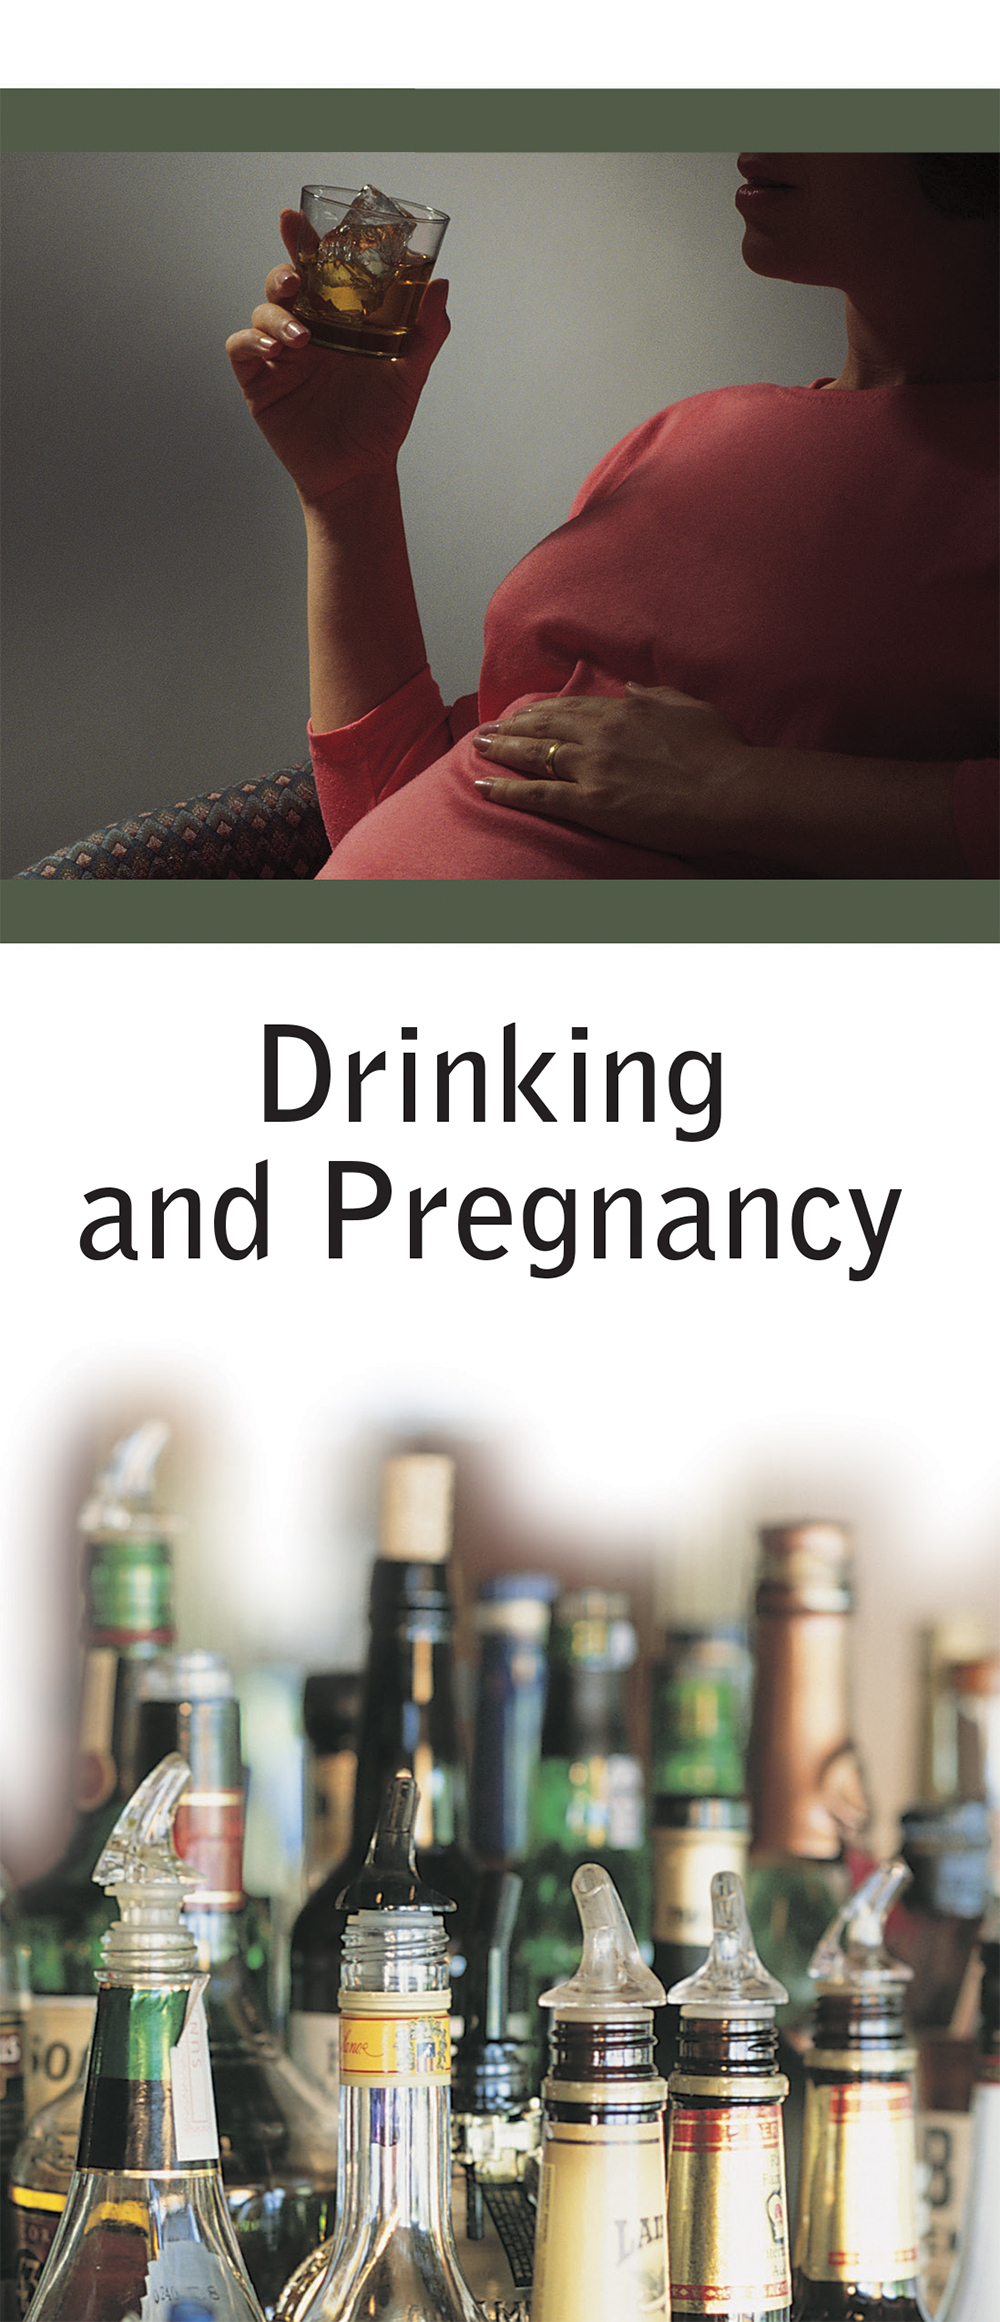 Literature, Drinking and Pregnancy: Pack of (50)